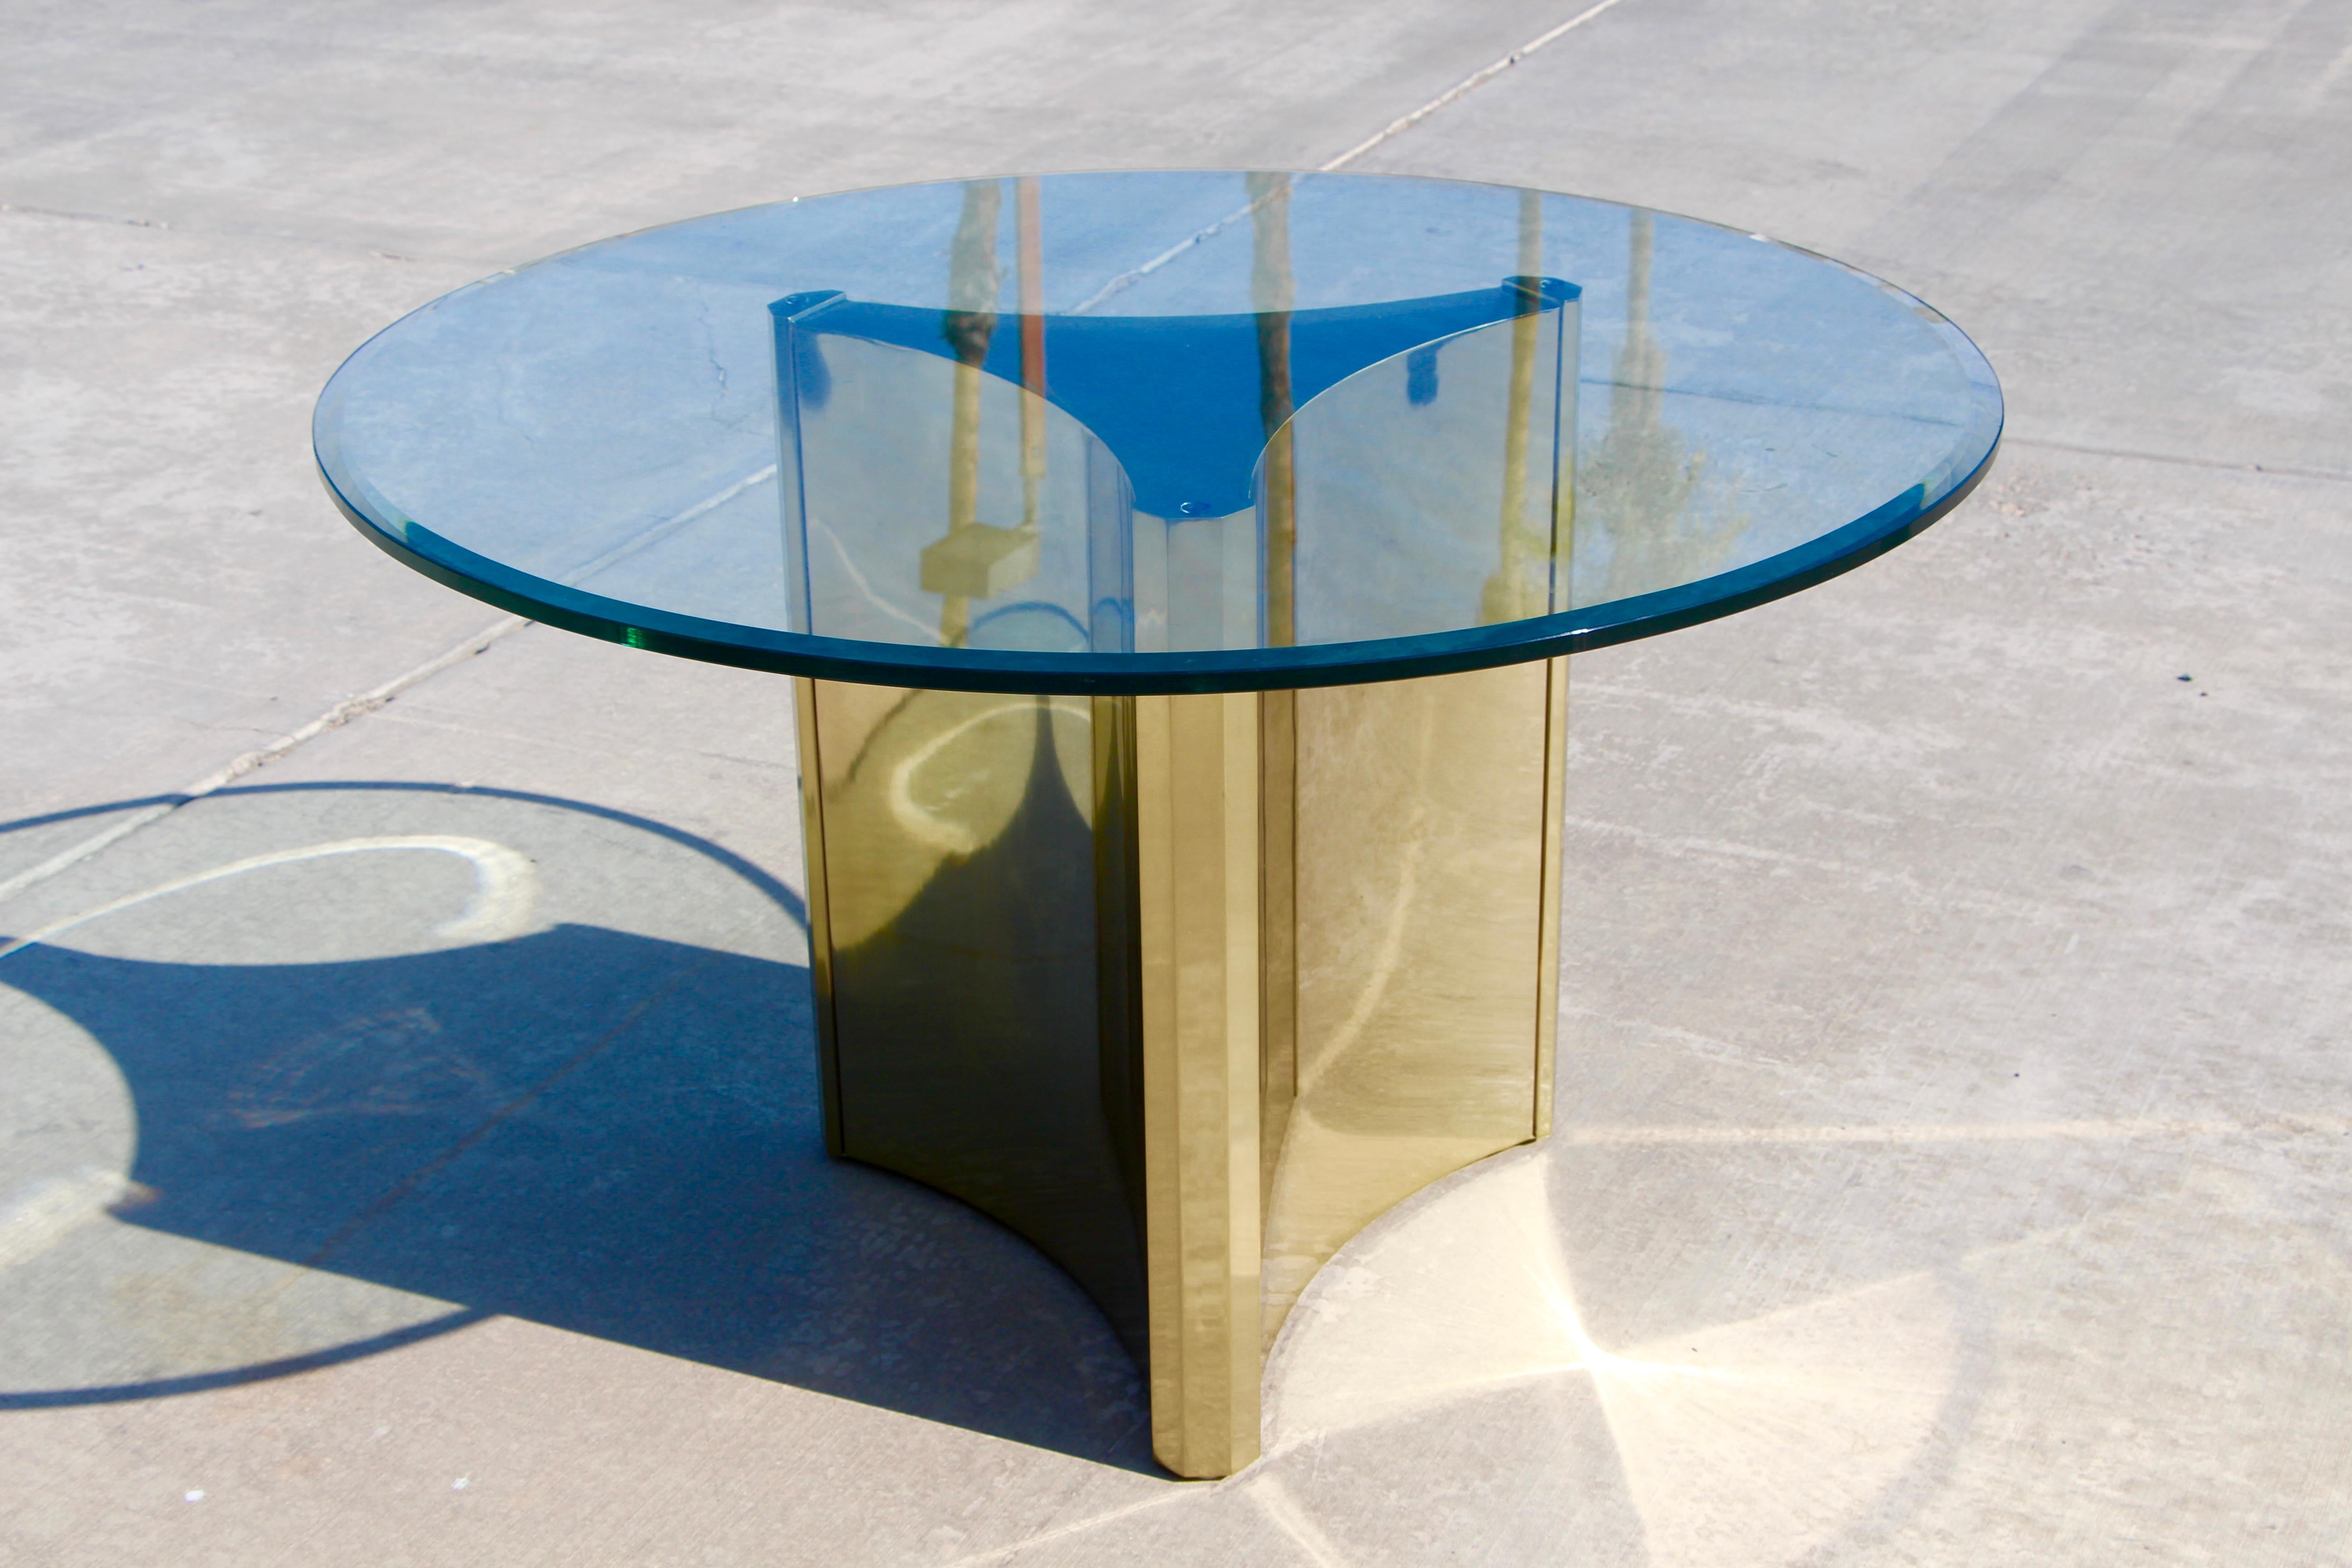 A nice example of a trefoil base brass plated Mastercraft table. Comes with a 48